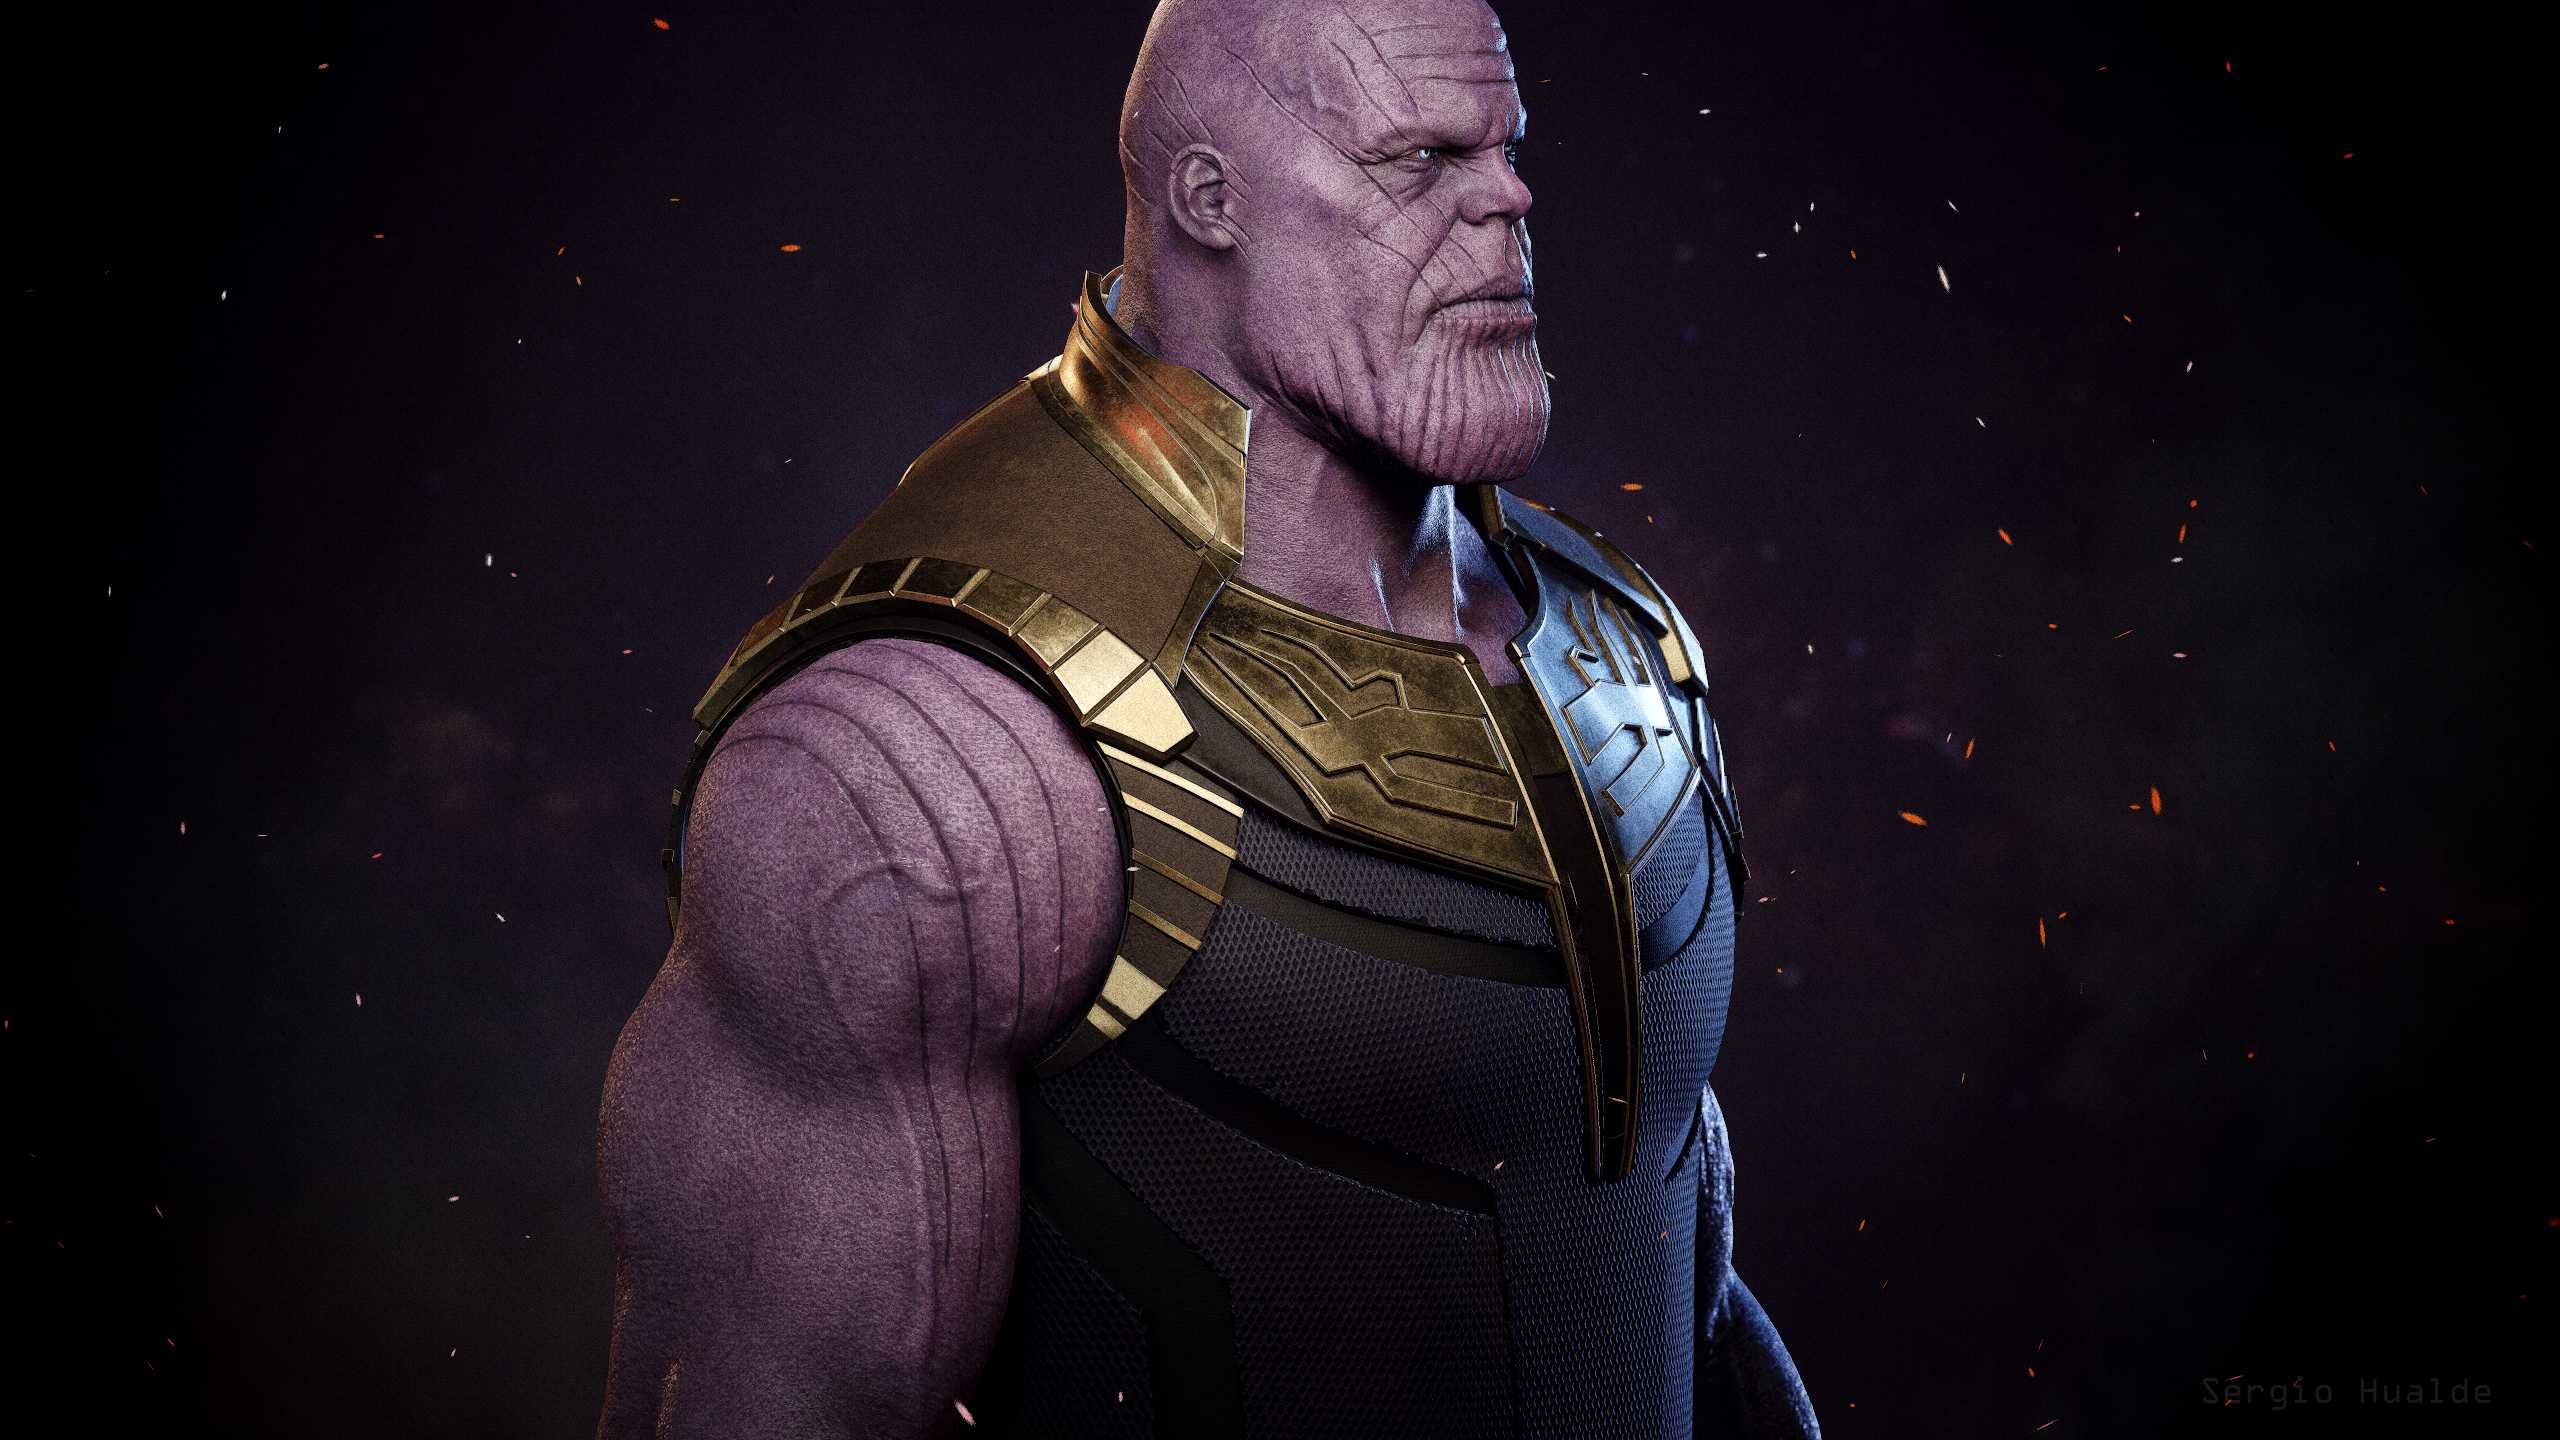 Thanos - Real time.